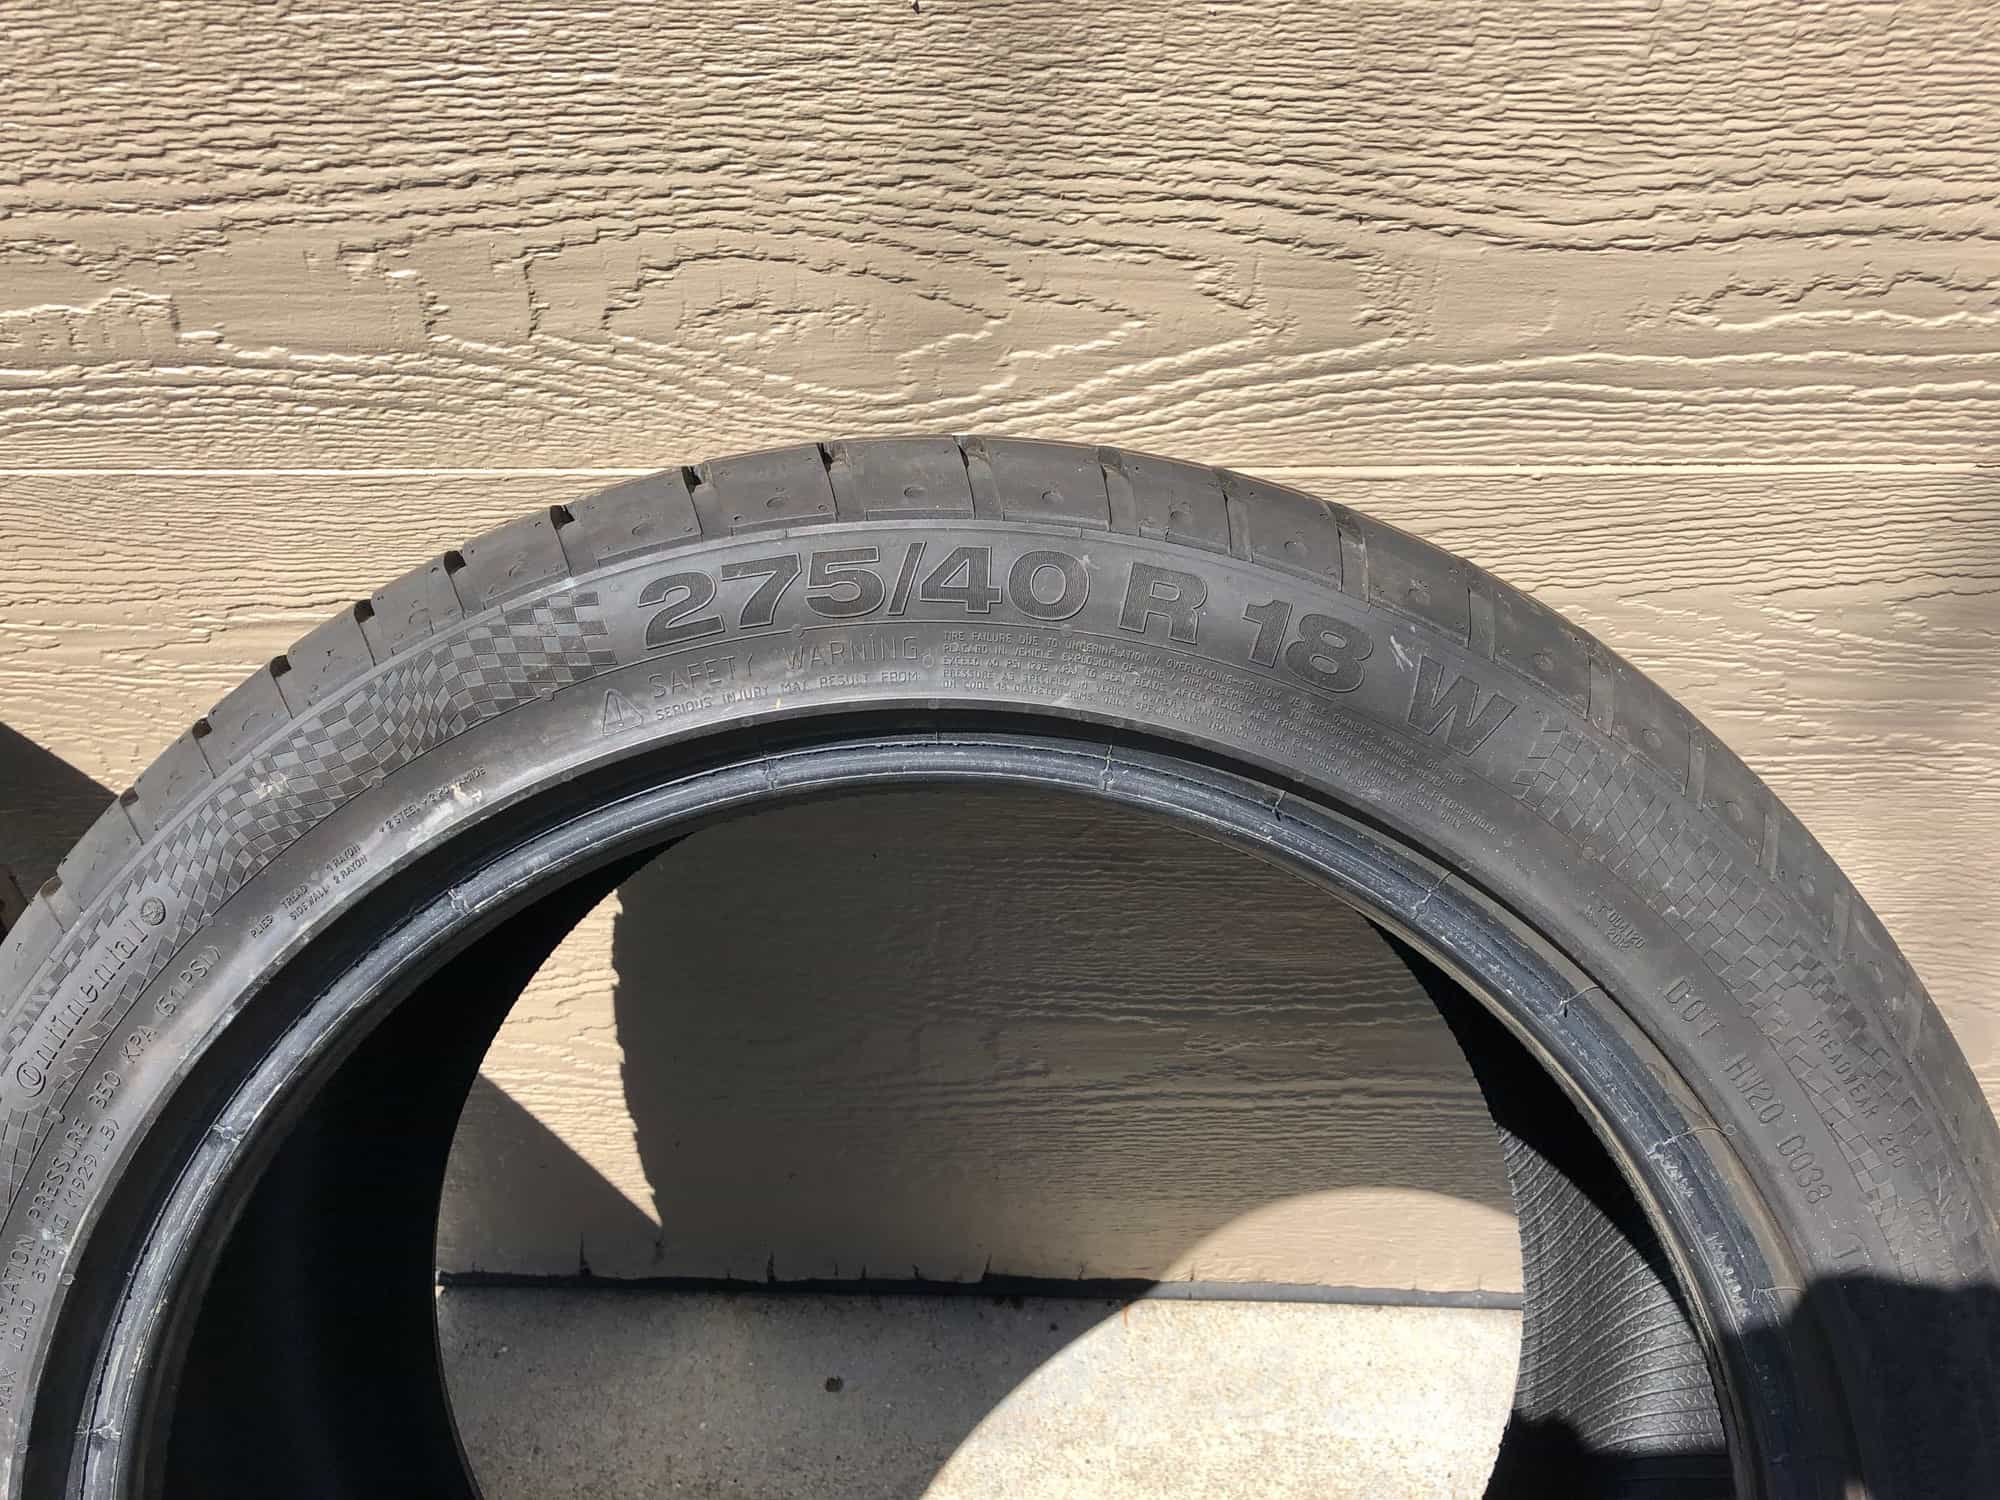 Wheels and Tires/Axles - FS [MidWest] New Continental Max Perf. Summer tires in 245/45ZR18 & 270/40ZR18 - New - All Years Any Make All Models - All Years Jaguar F-Type - Racine, WI 53403, United States